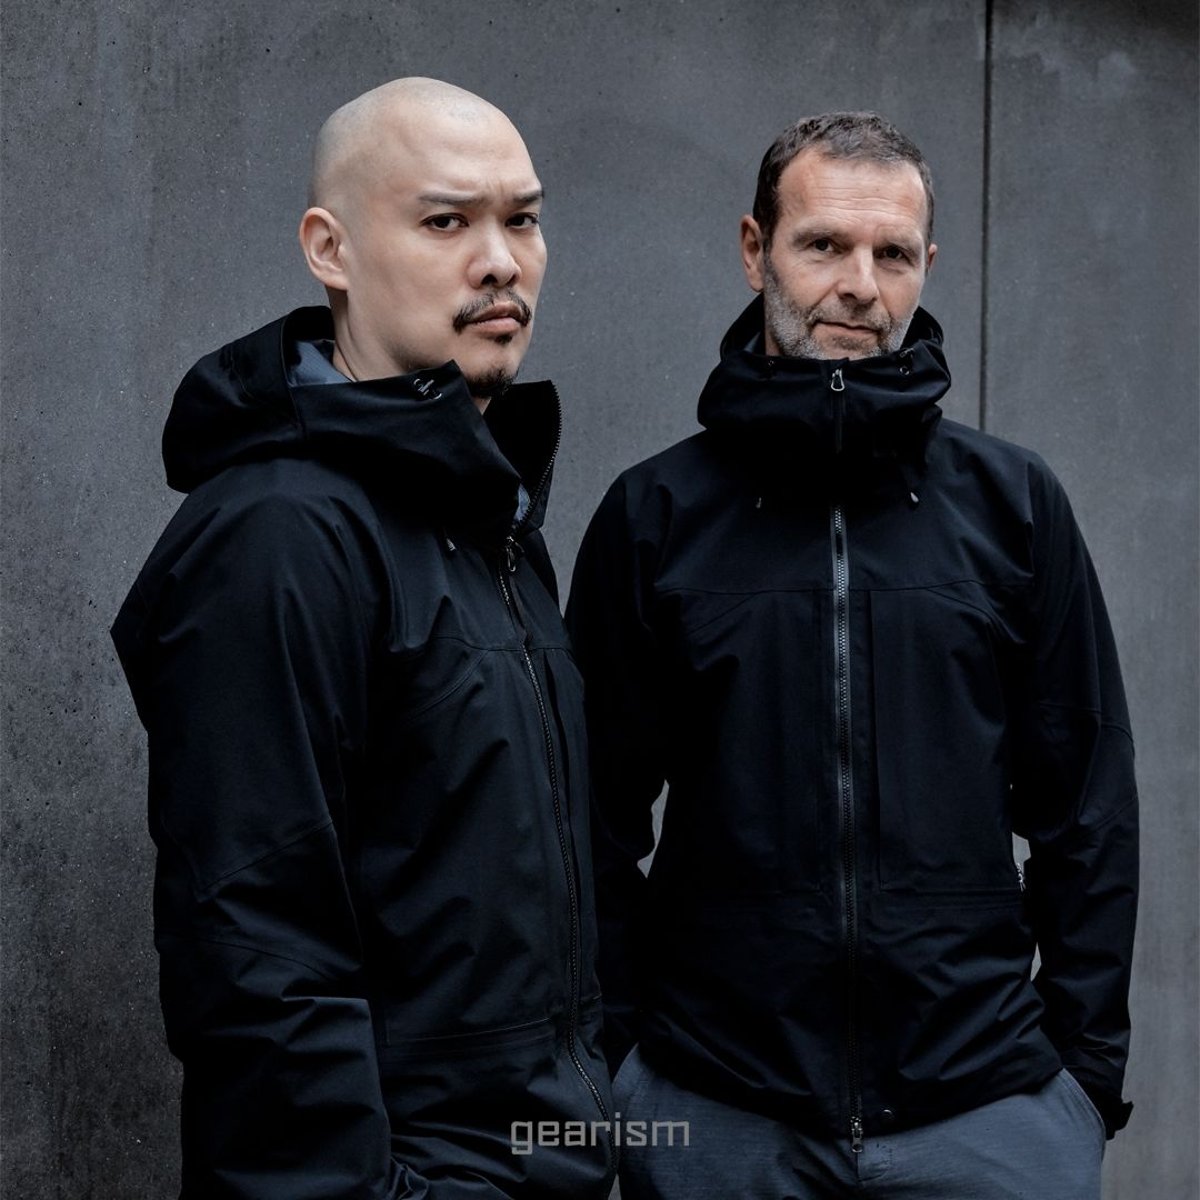 The 20th Anniversary Evolution Jacket | gearism...